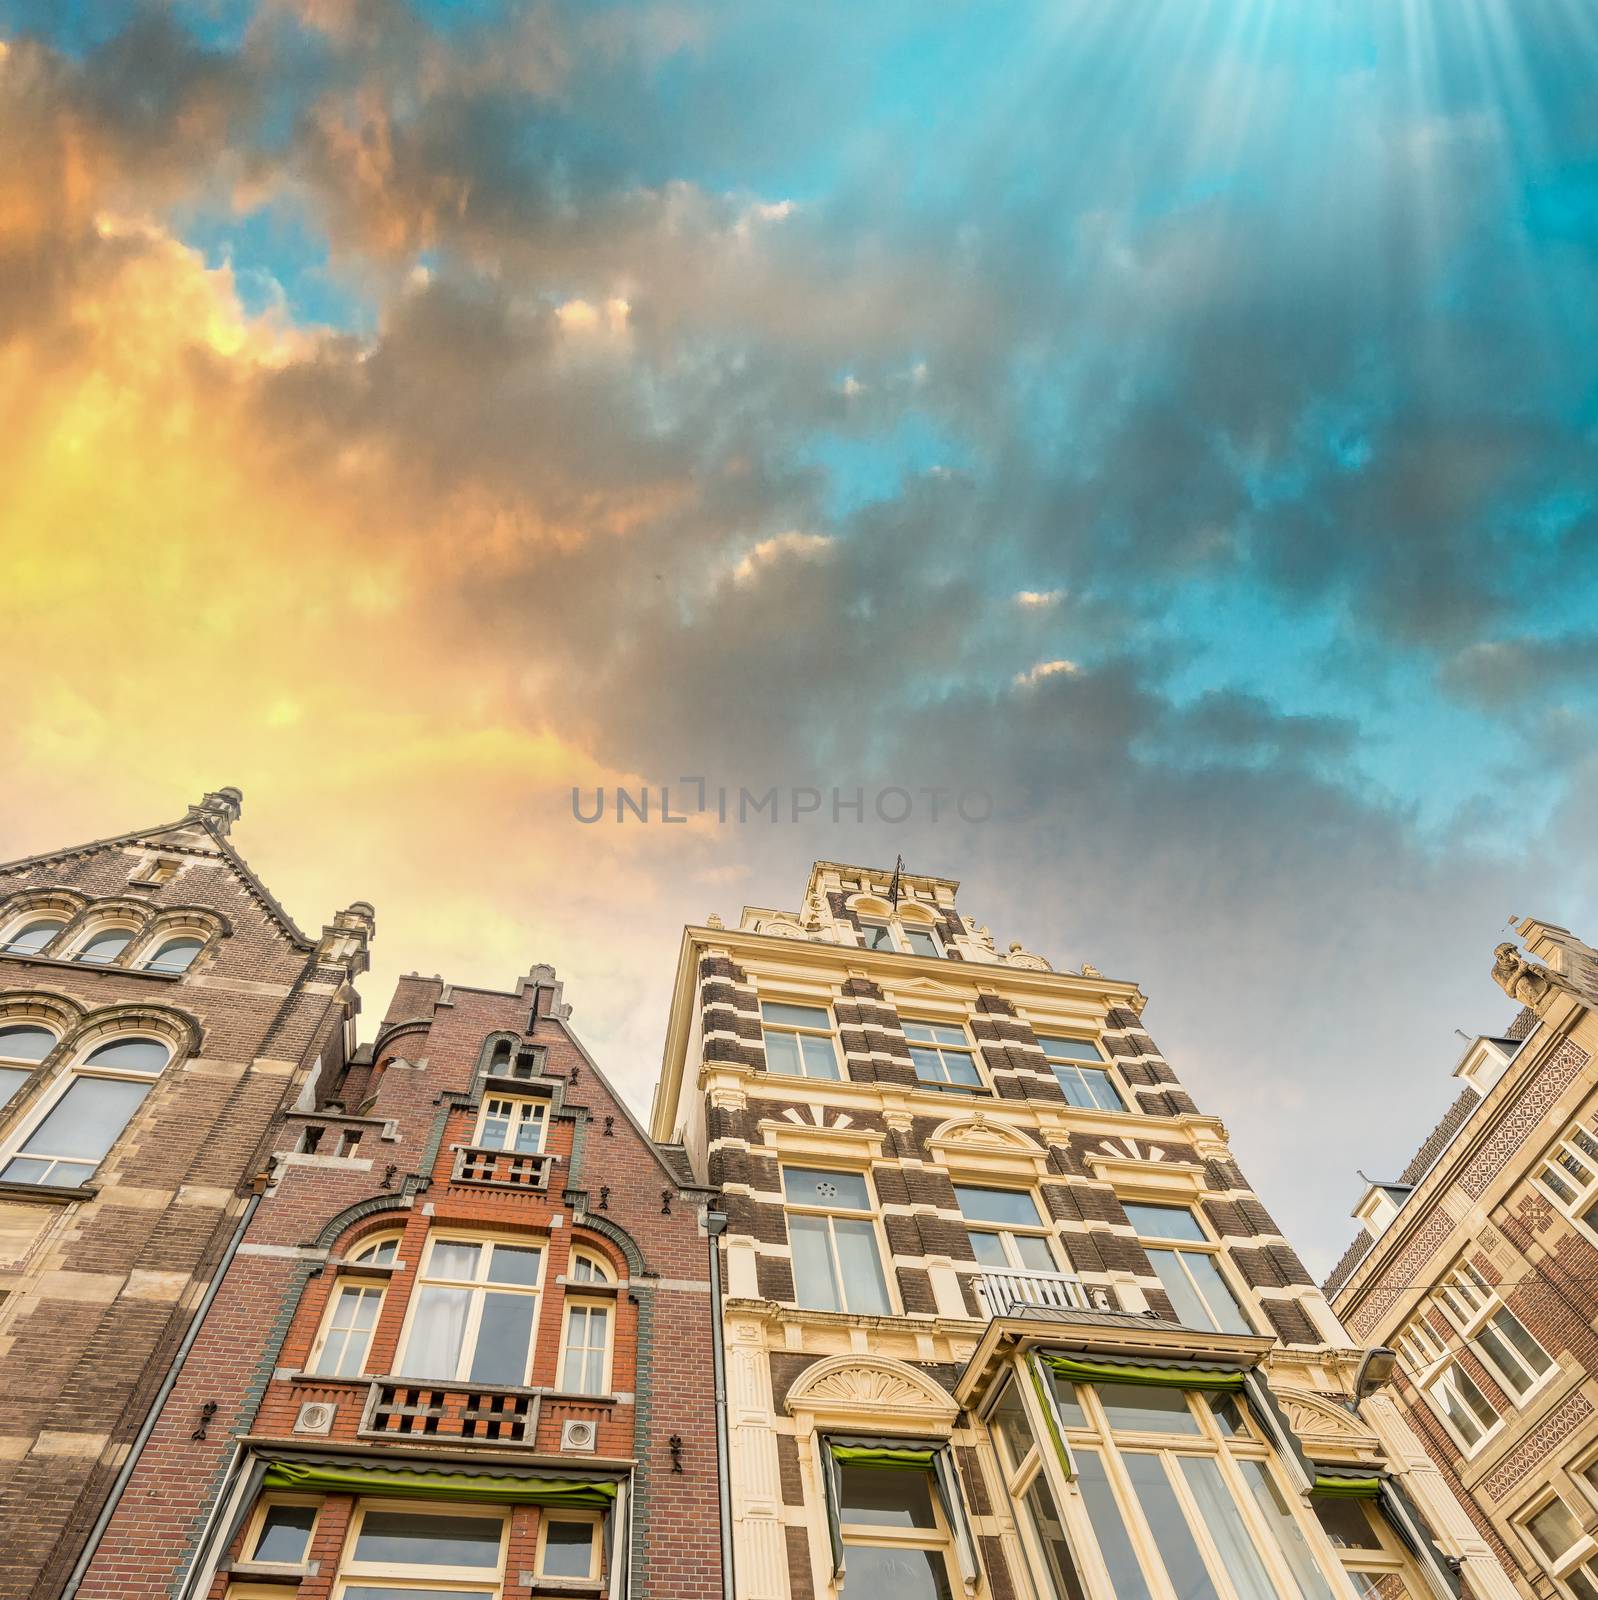 Dramatic sky over Amsterdam buildings.